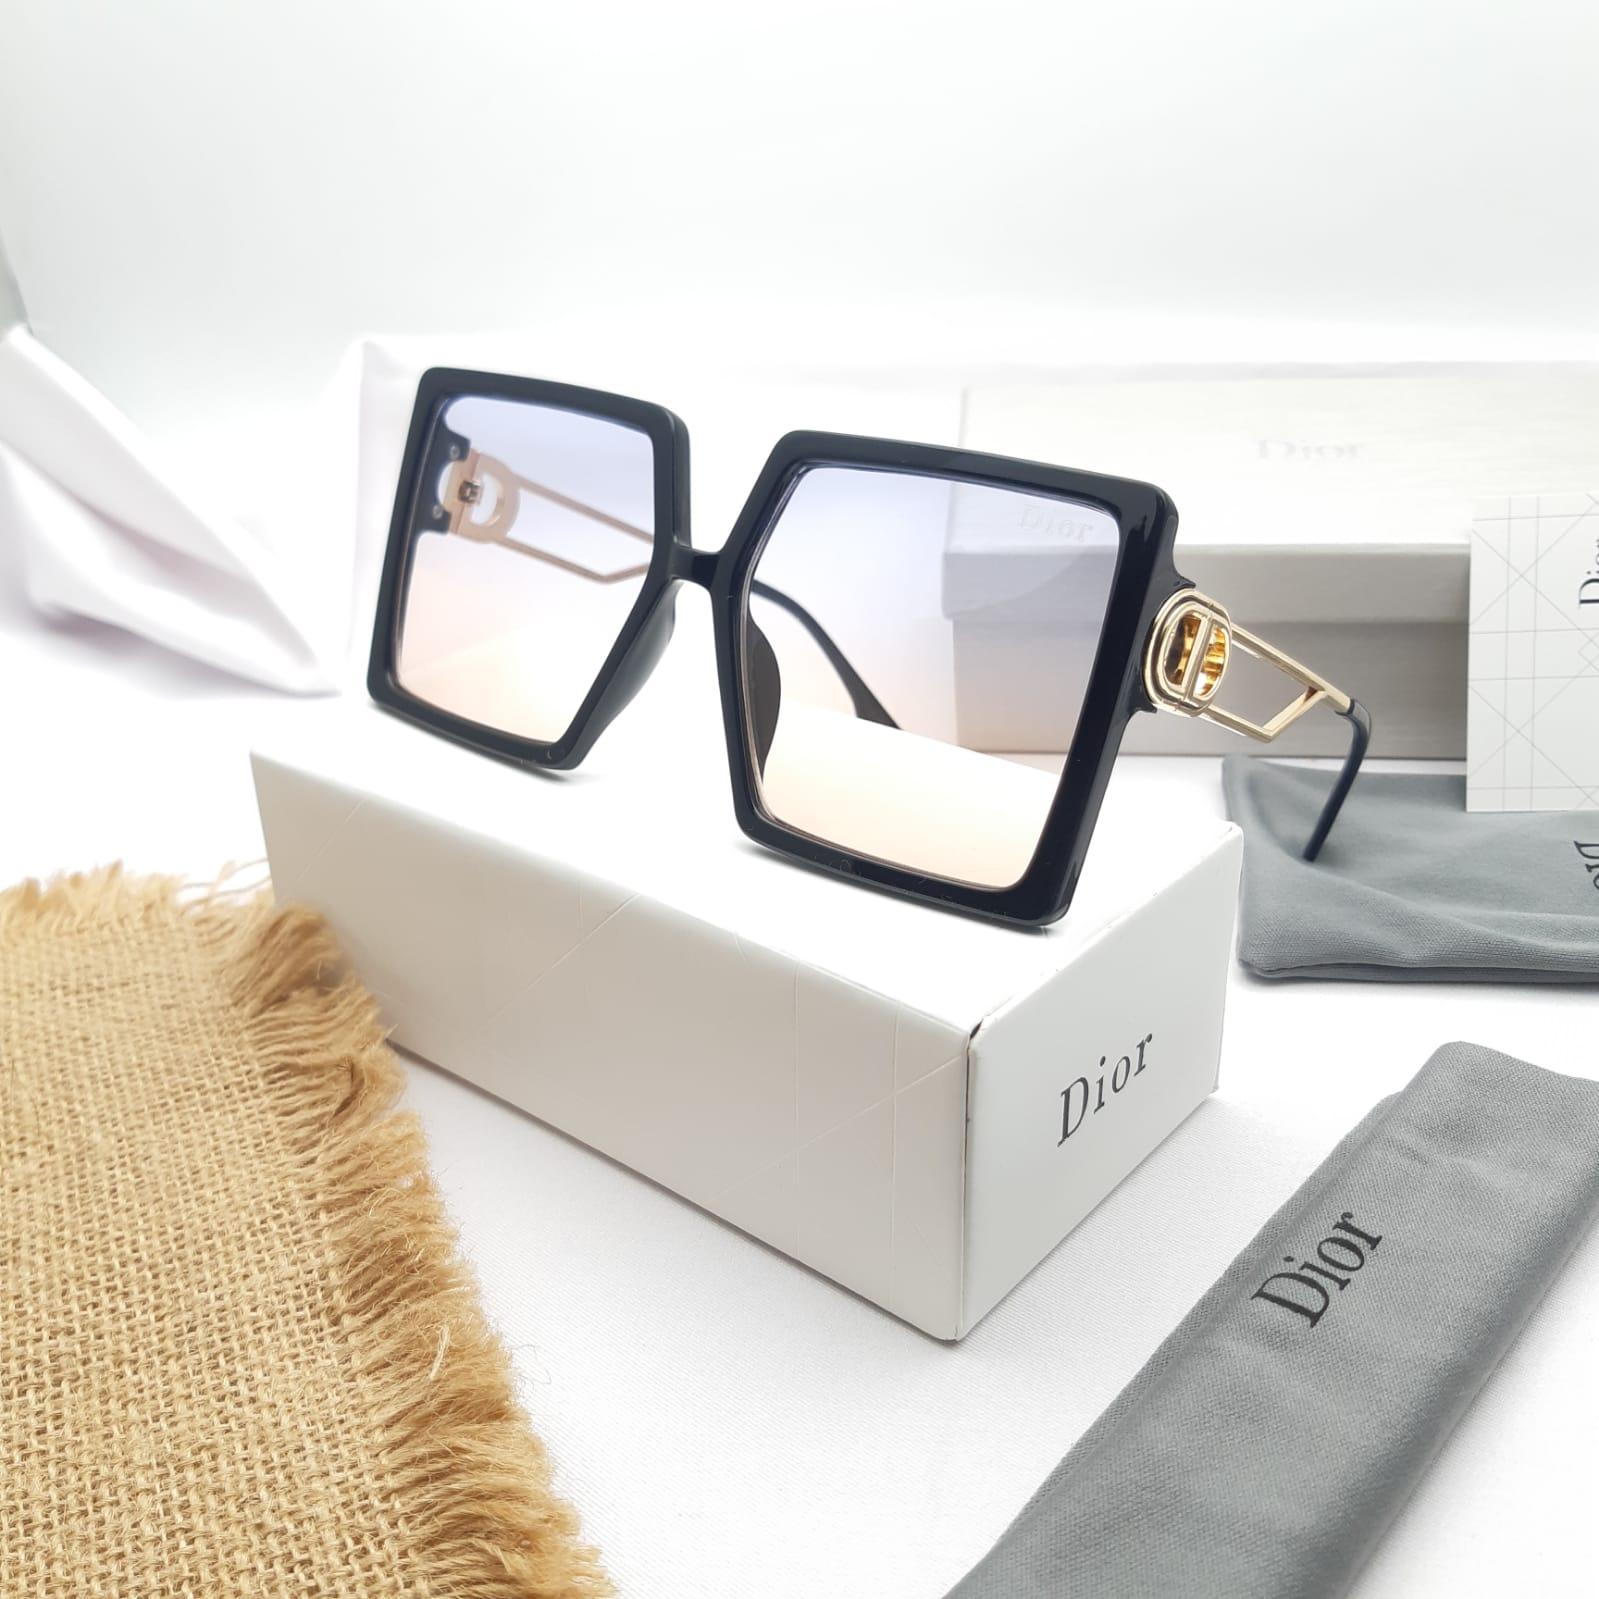 Dior Spectacles - Customized Prescription Sunglasses and Spectacles